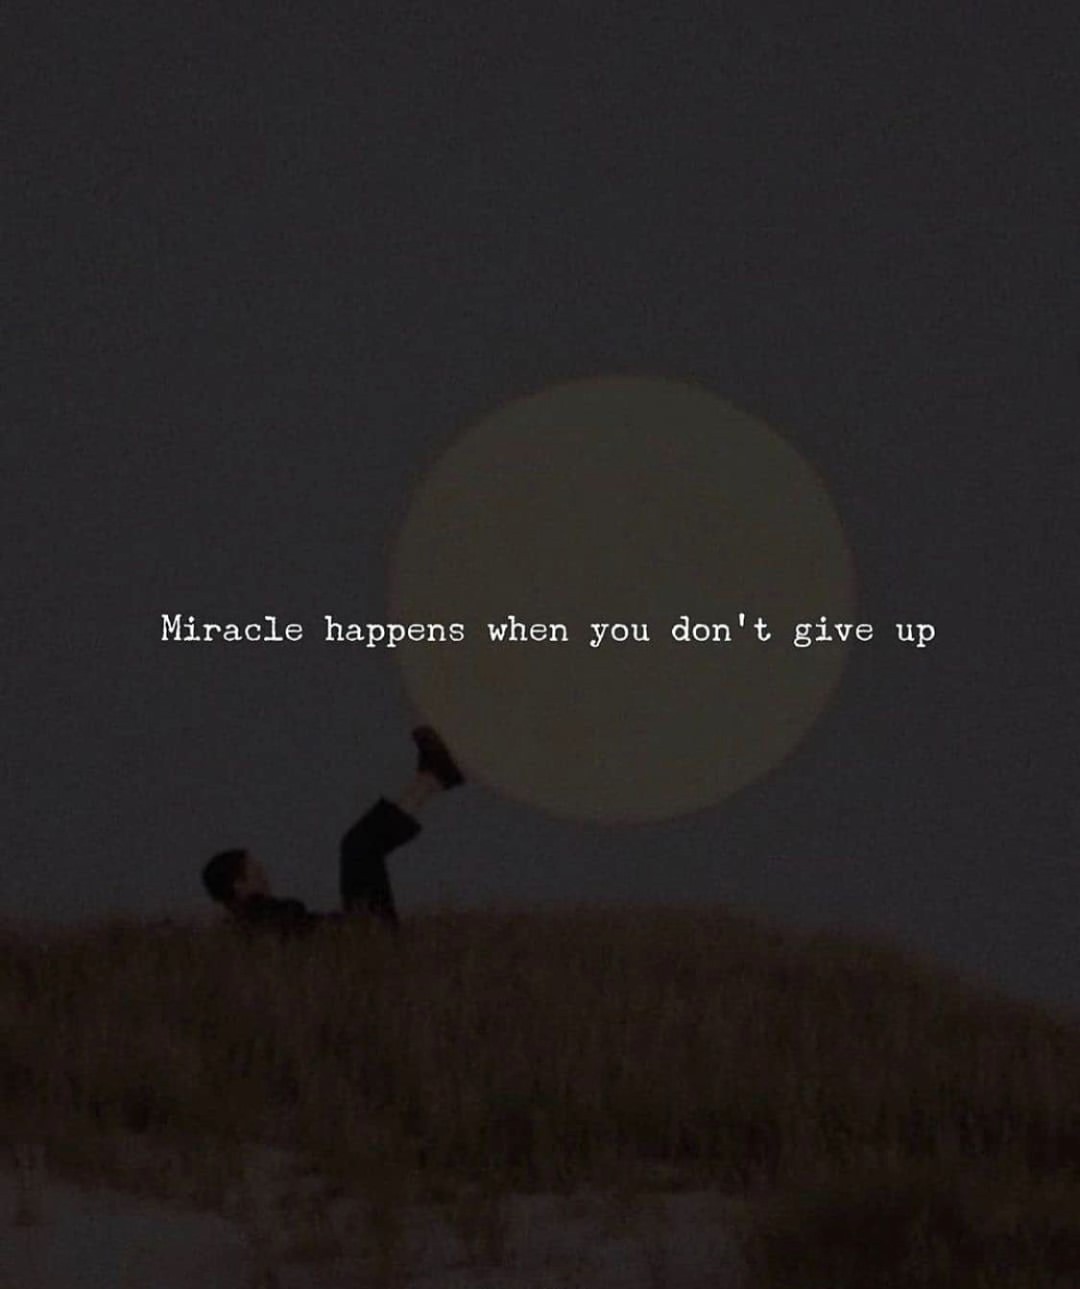 Miracle happens when you don't, give up. - Phrases